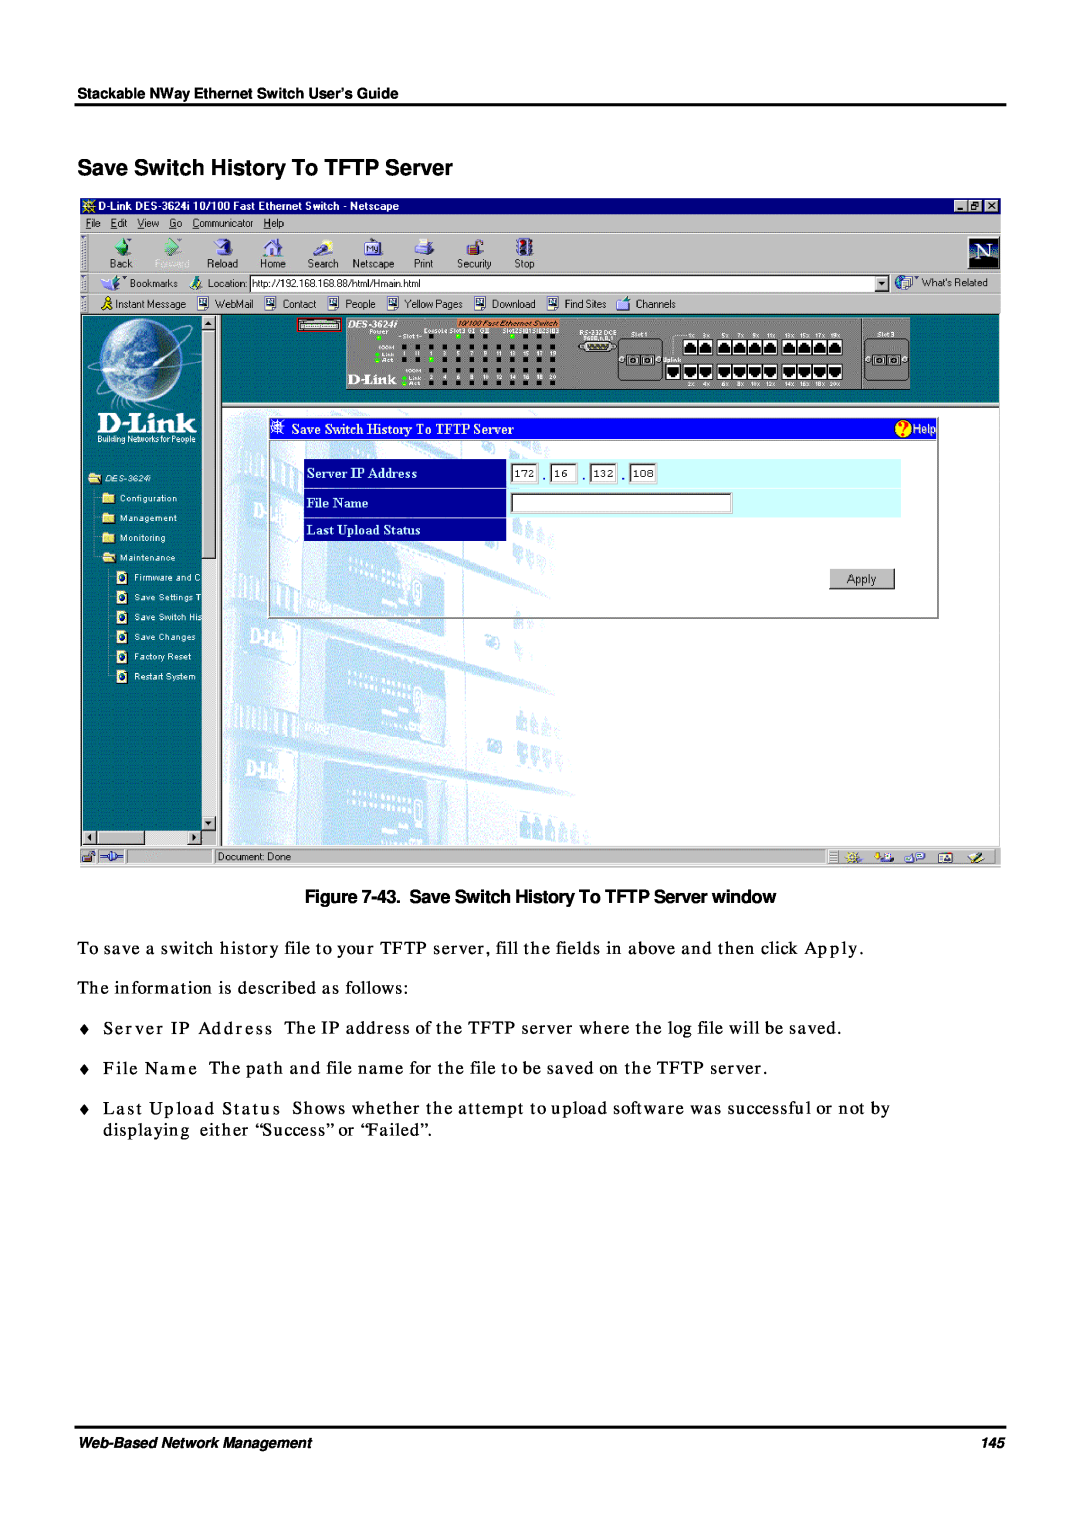 D-Link DES-3624 manual 43. Save Switch History To TFTP Server window 